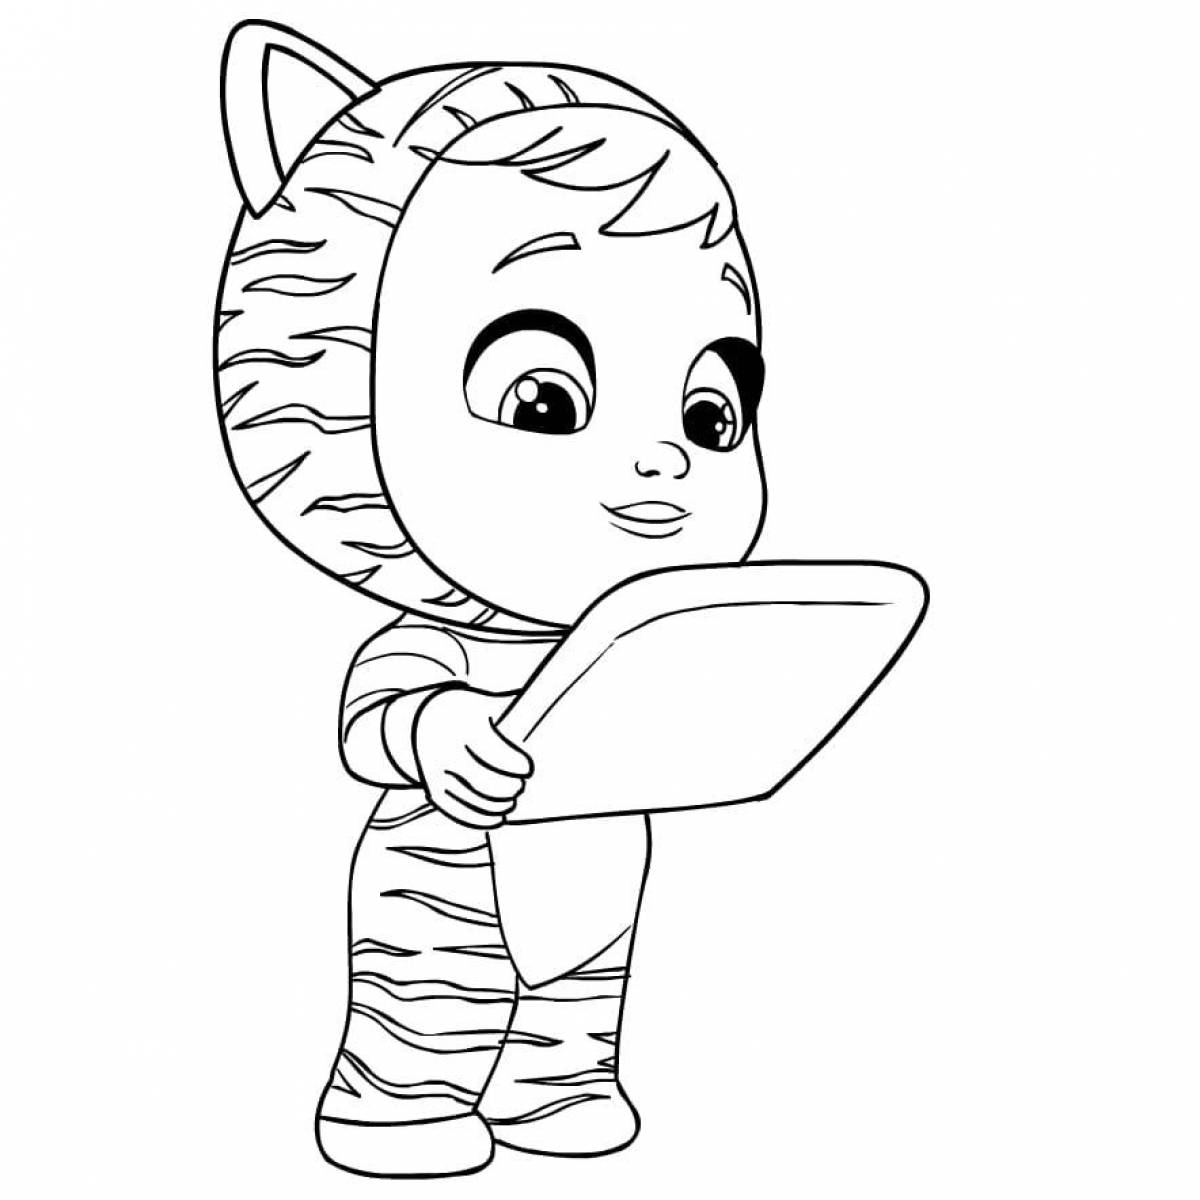 The edge of the splendid babys coloring page